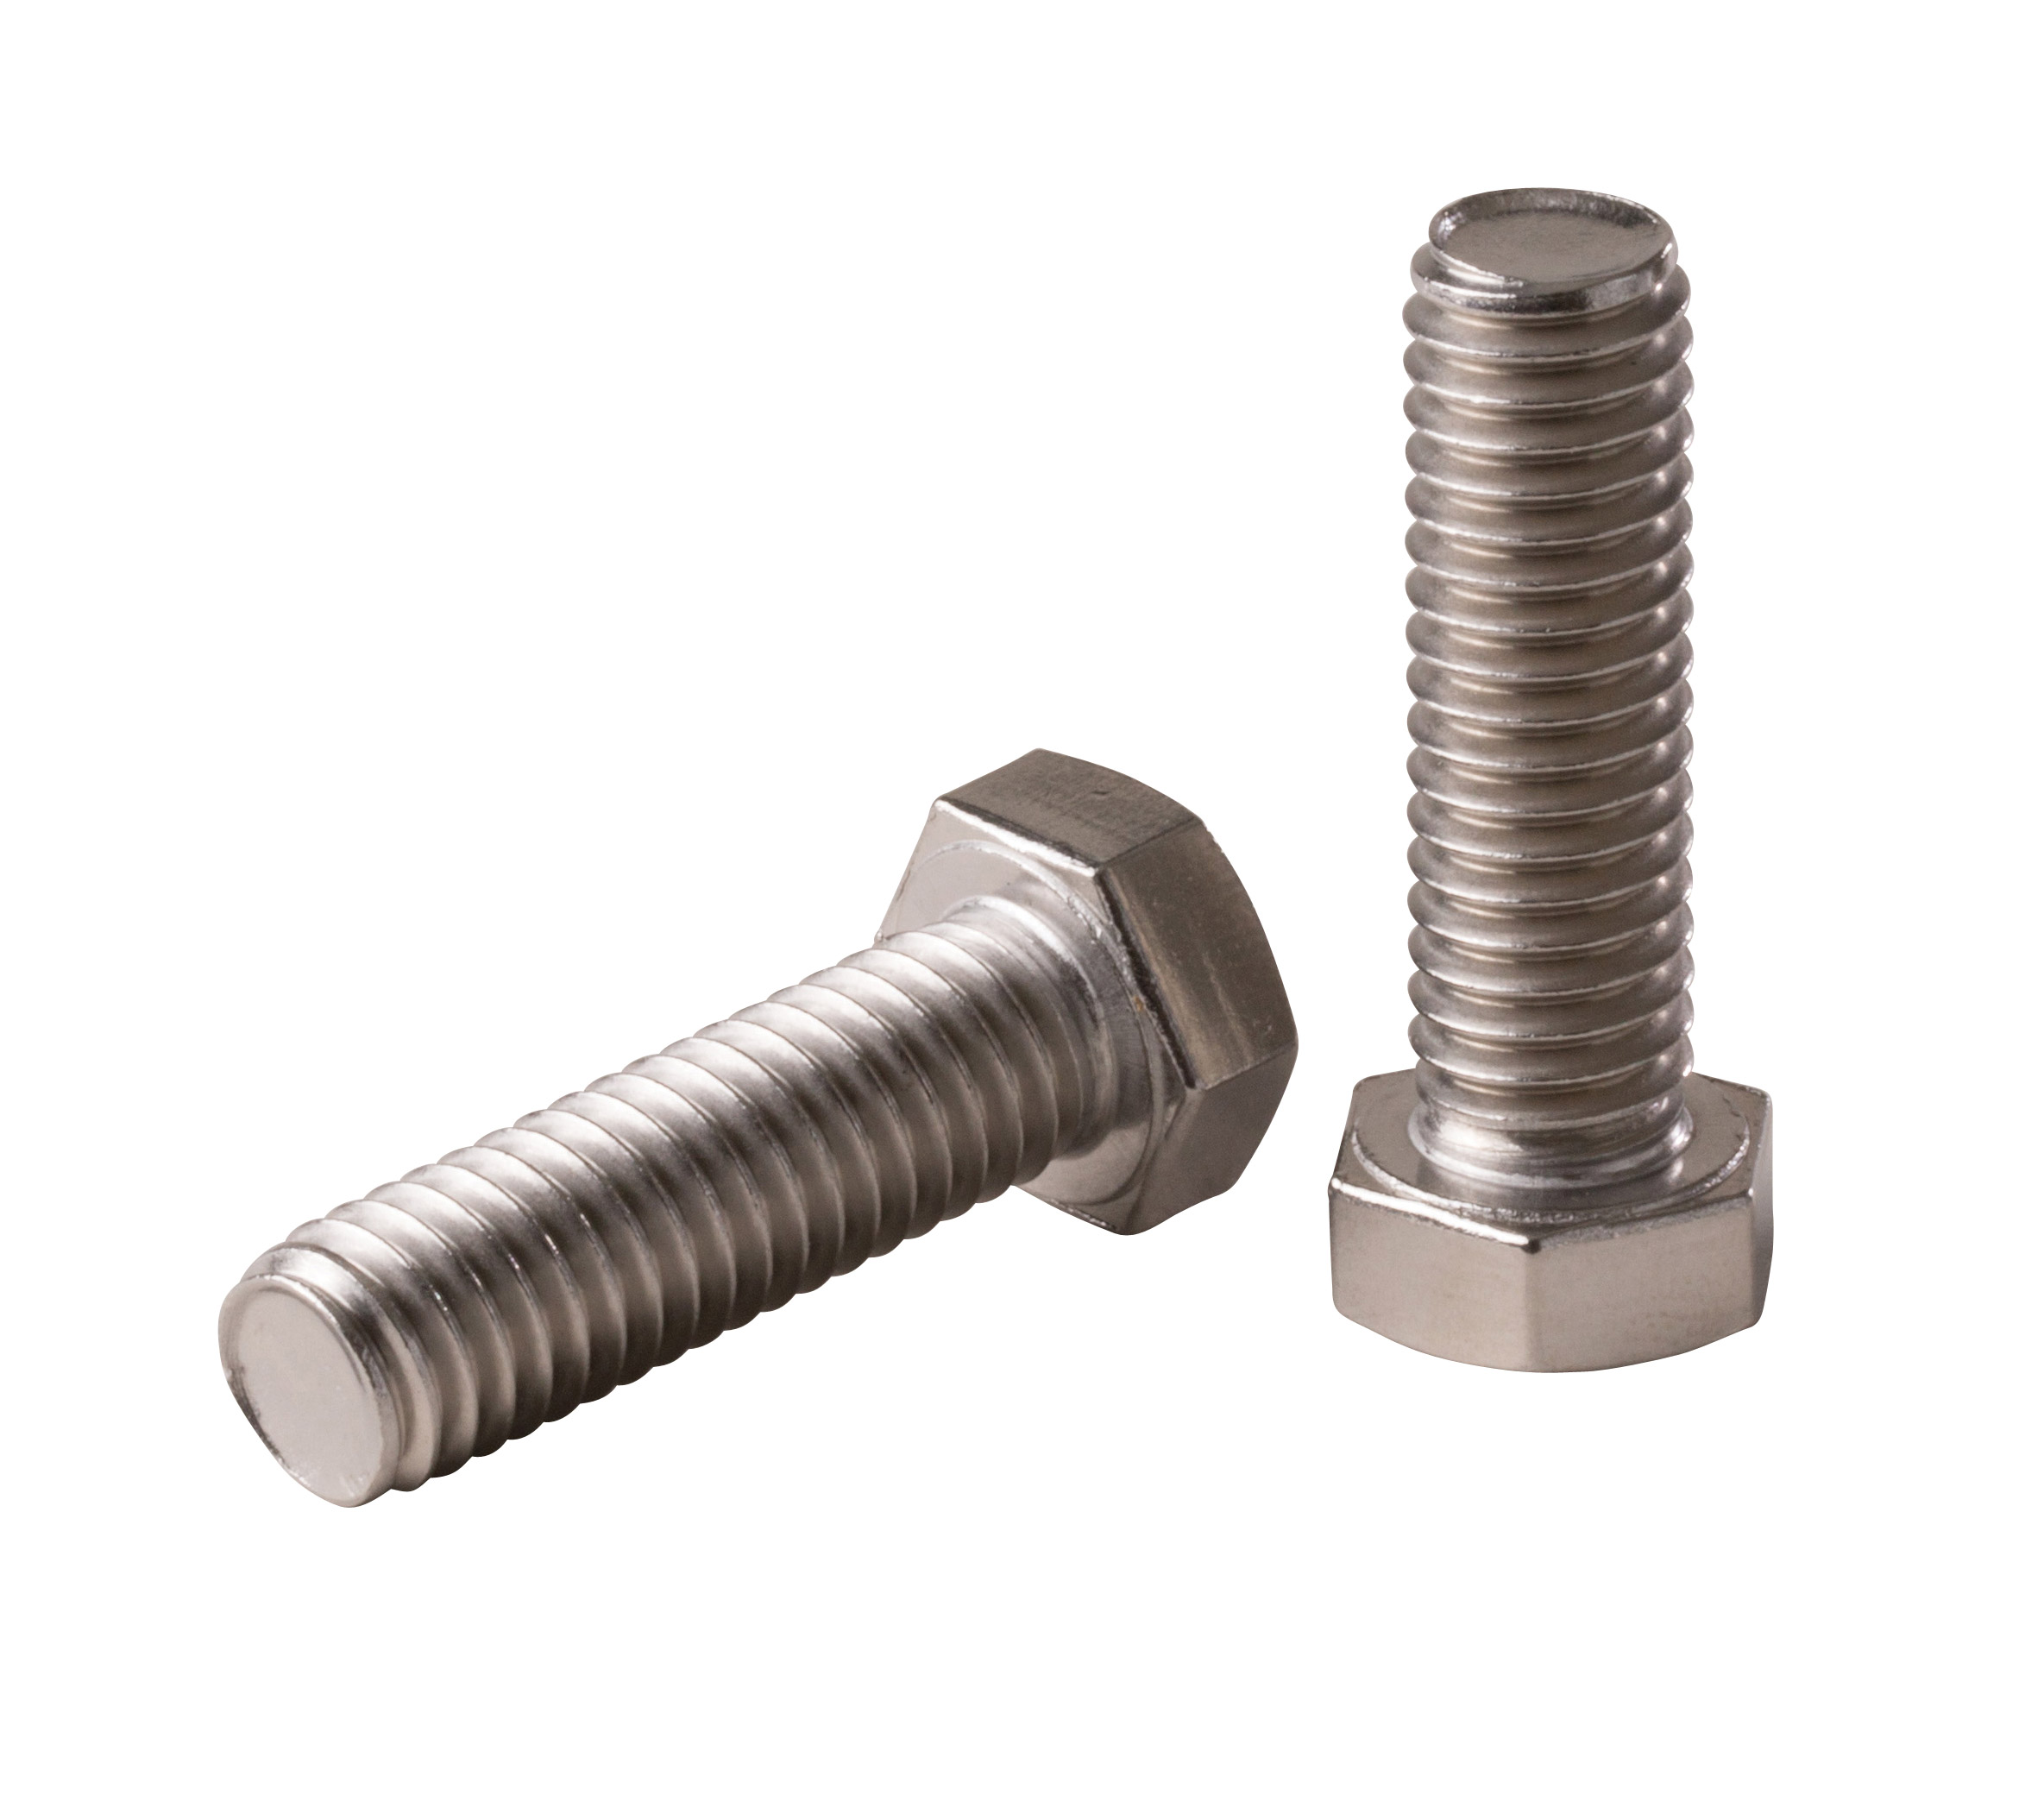 Izzy Industries 3/8-Inch x 1-1/4-Inch Hex Head Bolts (10-Pack) from Columbia Safety